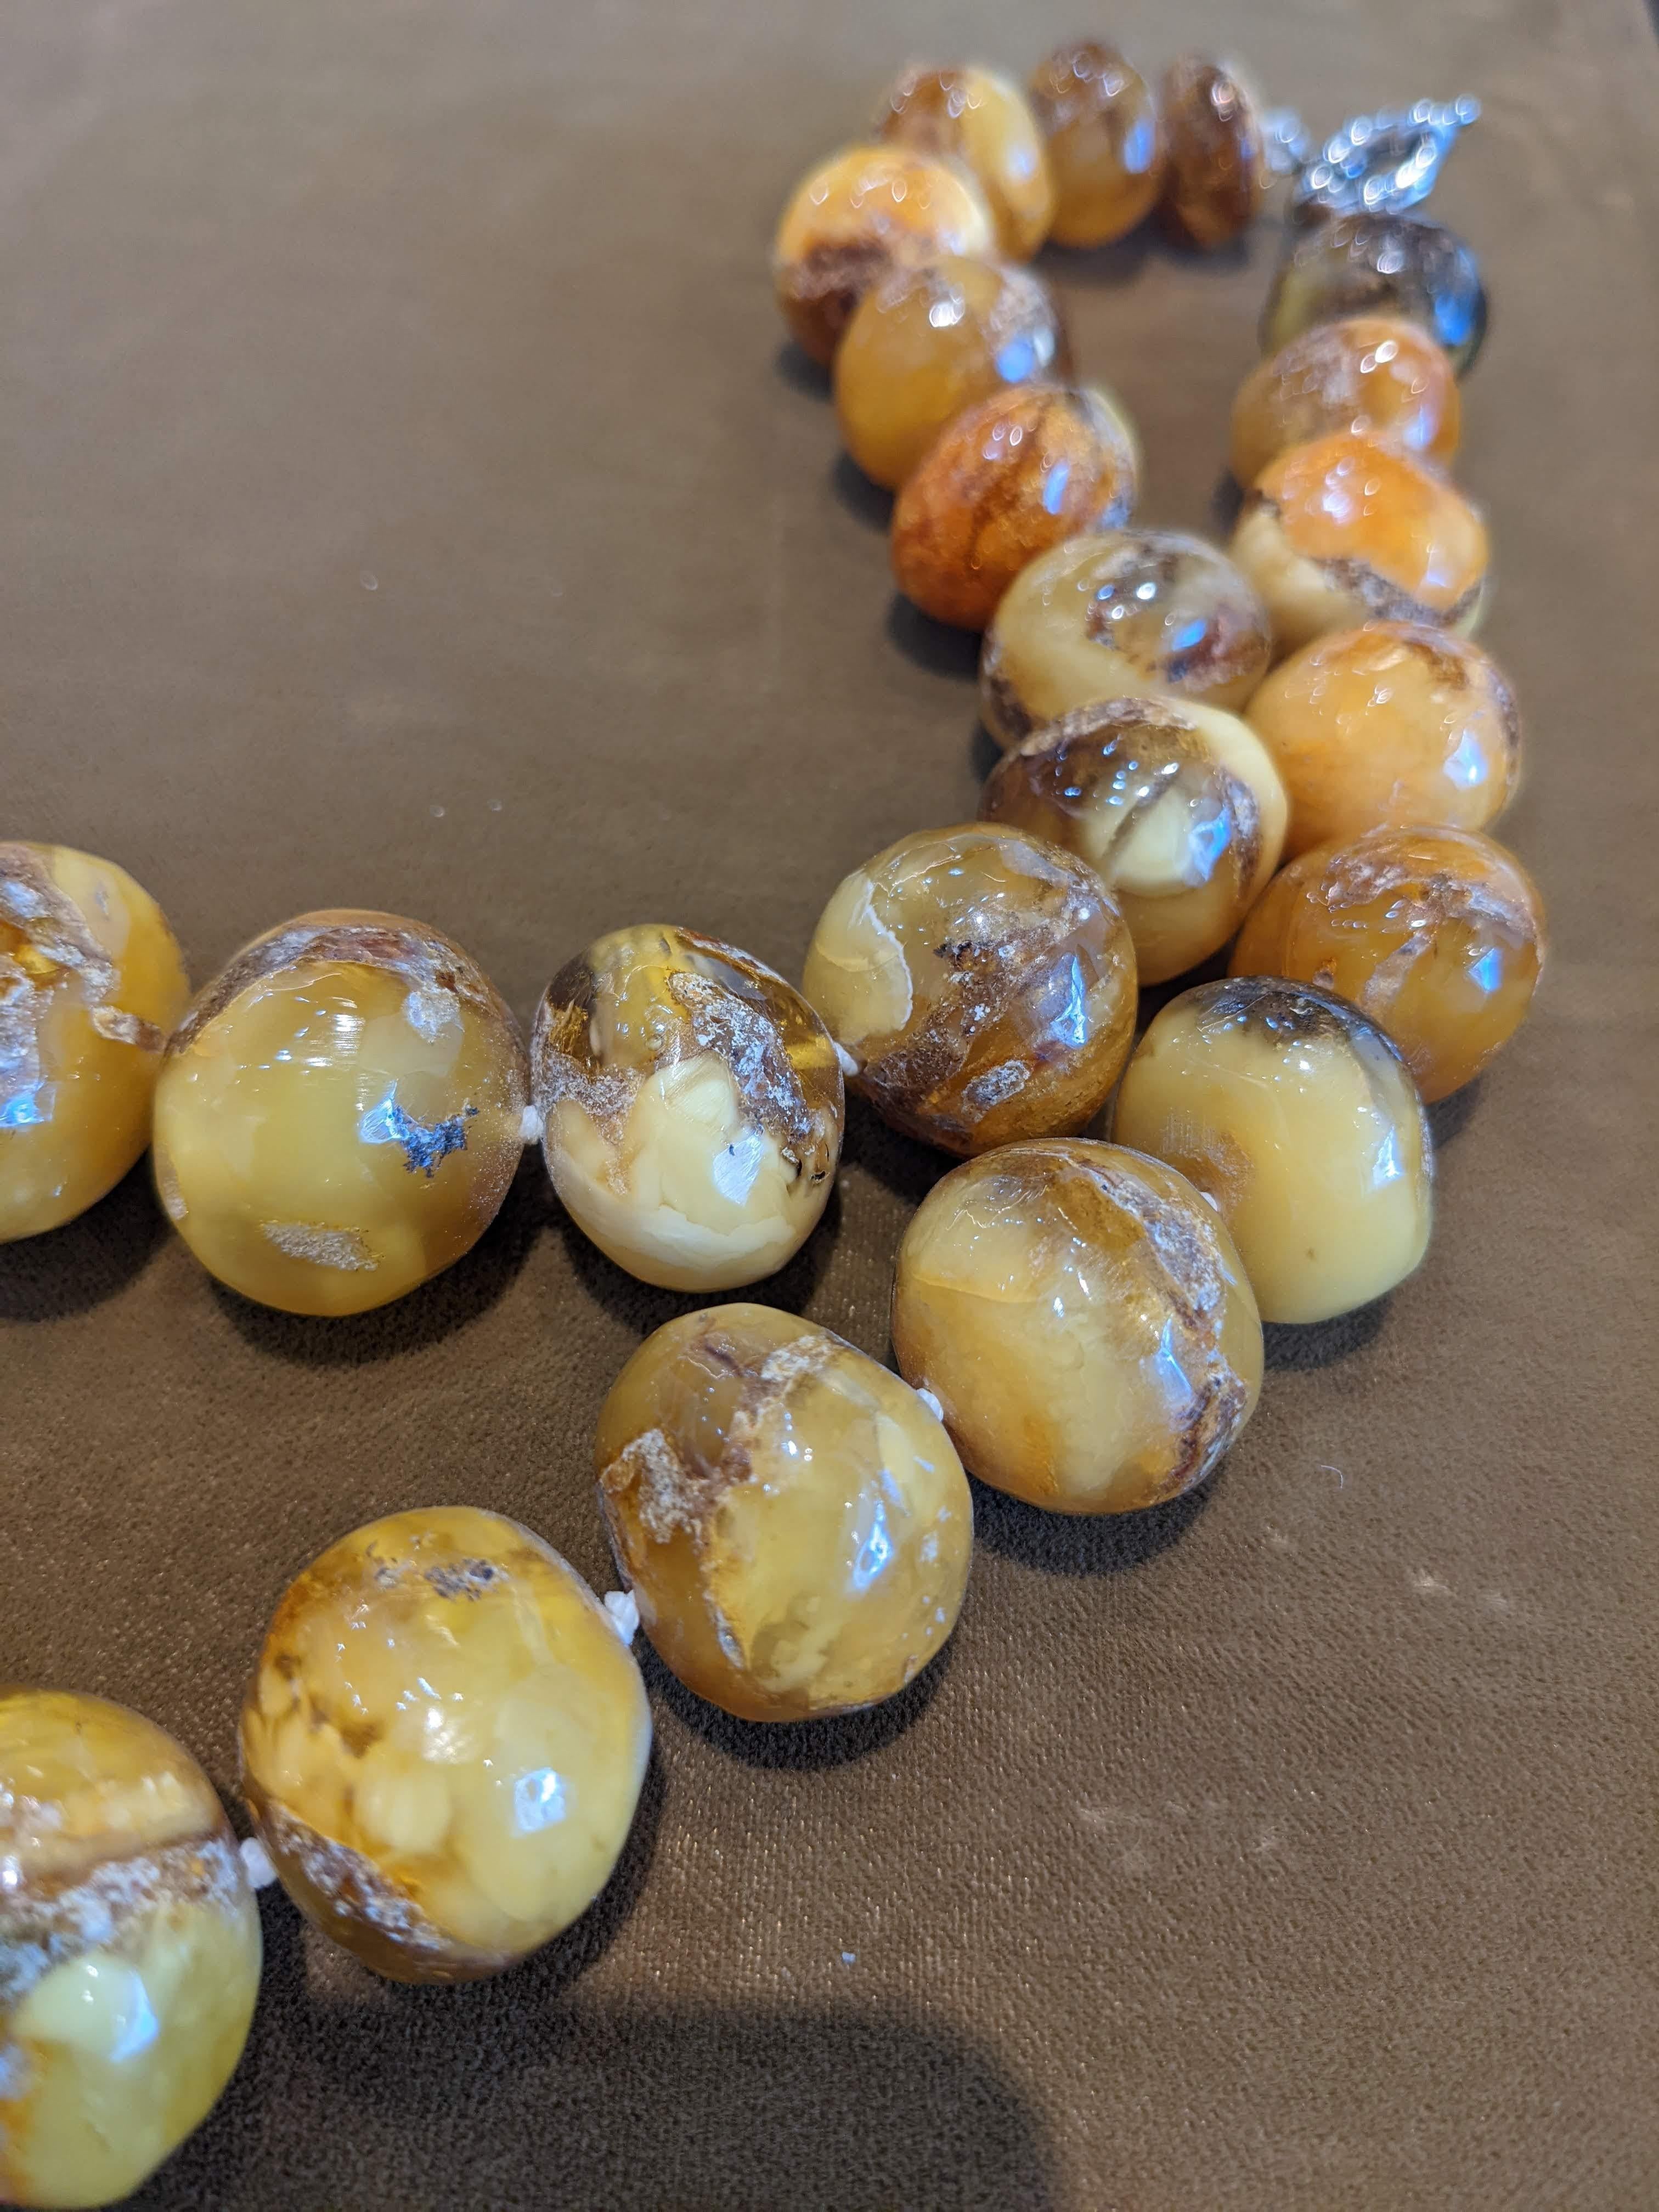 All Natural Rough Cut Baltic Amber Beaded Necklace with 925 sterling silver clasp.
19'' inches long (not including clasp).
113 grams total weight.
Beautiful honey and caramel tones with natural inclusions and colour ranges within each bead. 